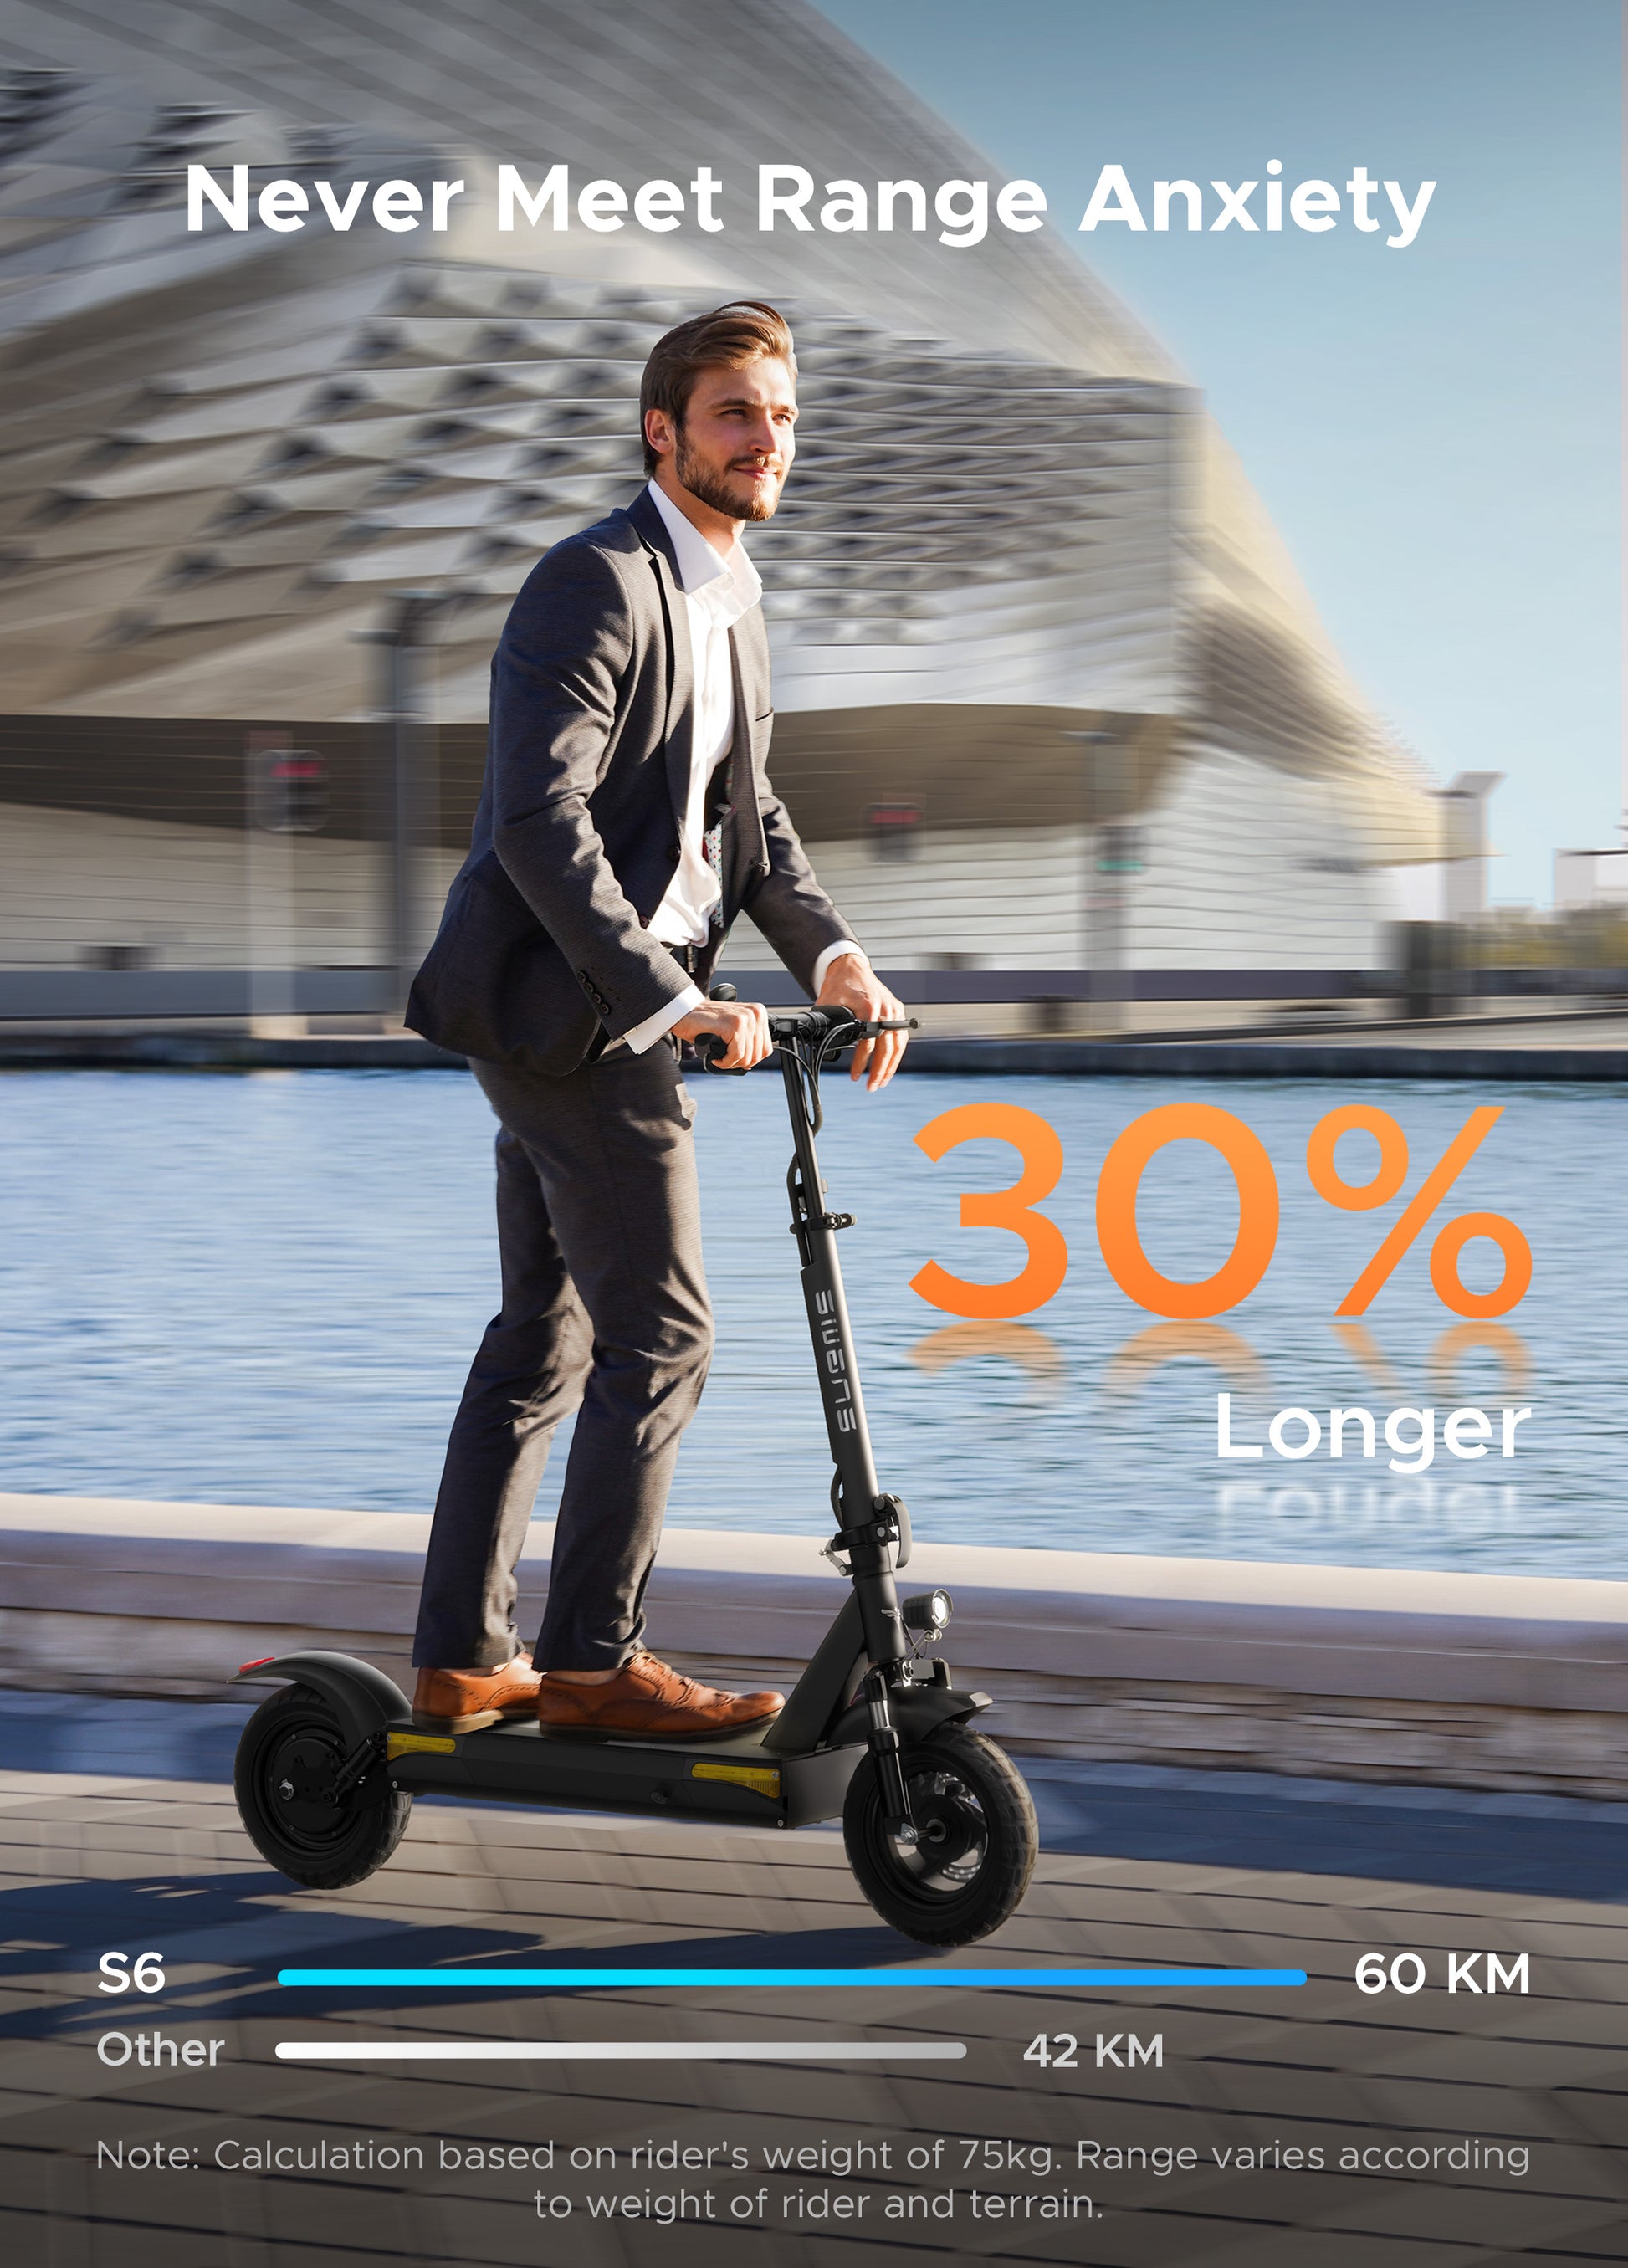 Man riding Engwe S6 e-scooter by the waterfront, illustrating extended range capabilities.